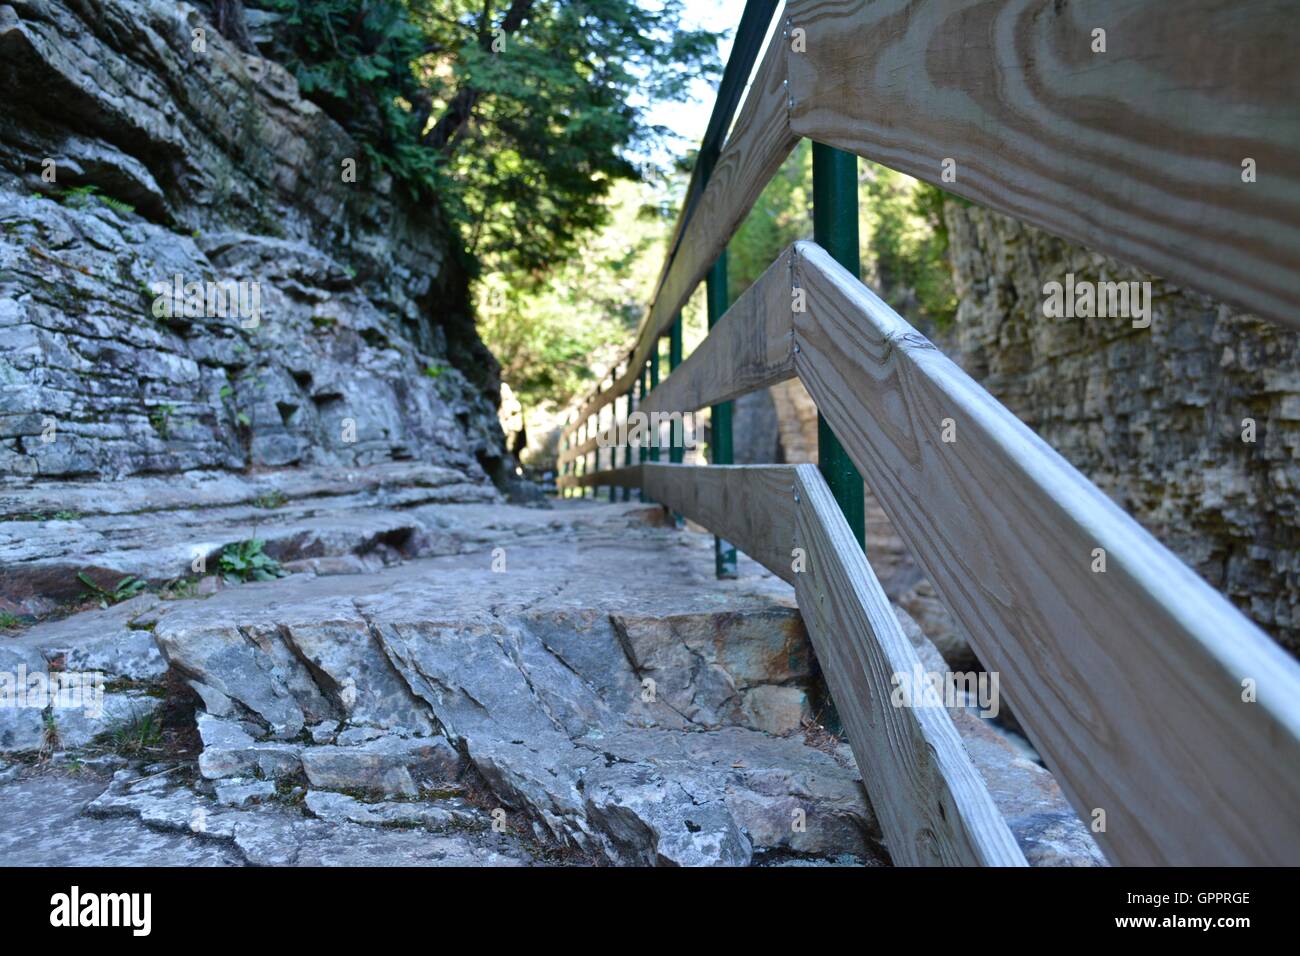 A stone nature path with a wooden and steel fence running along one side of it. Stock Photo